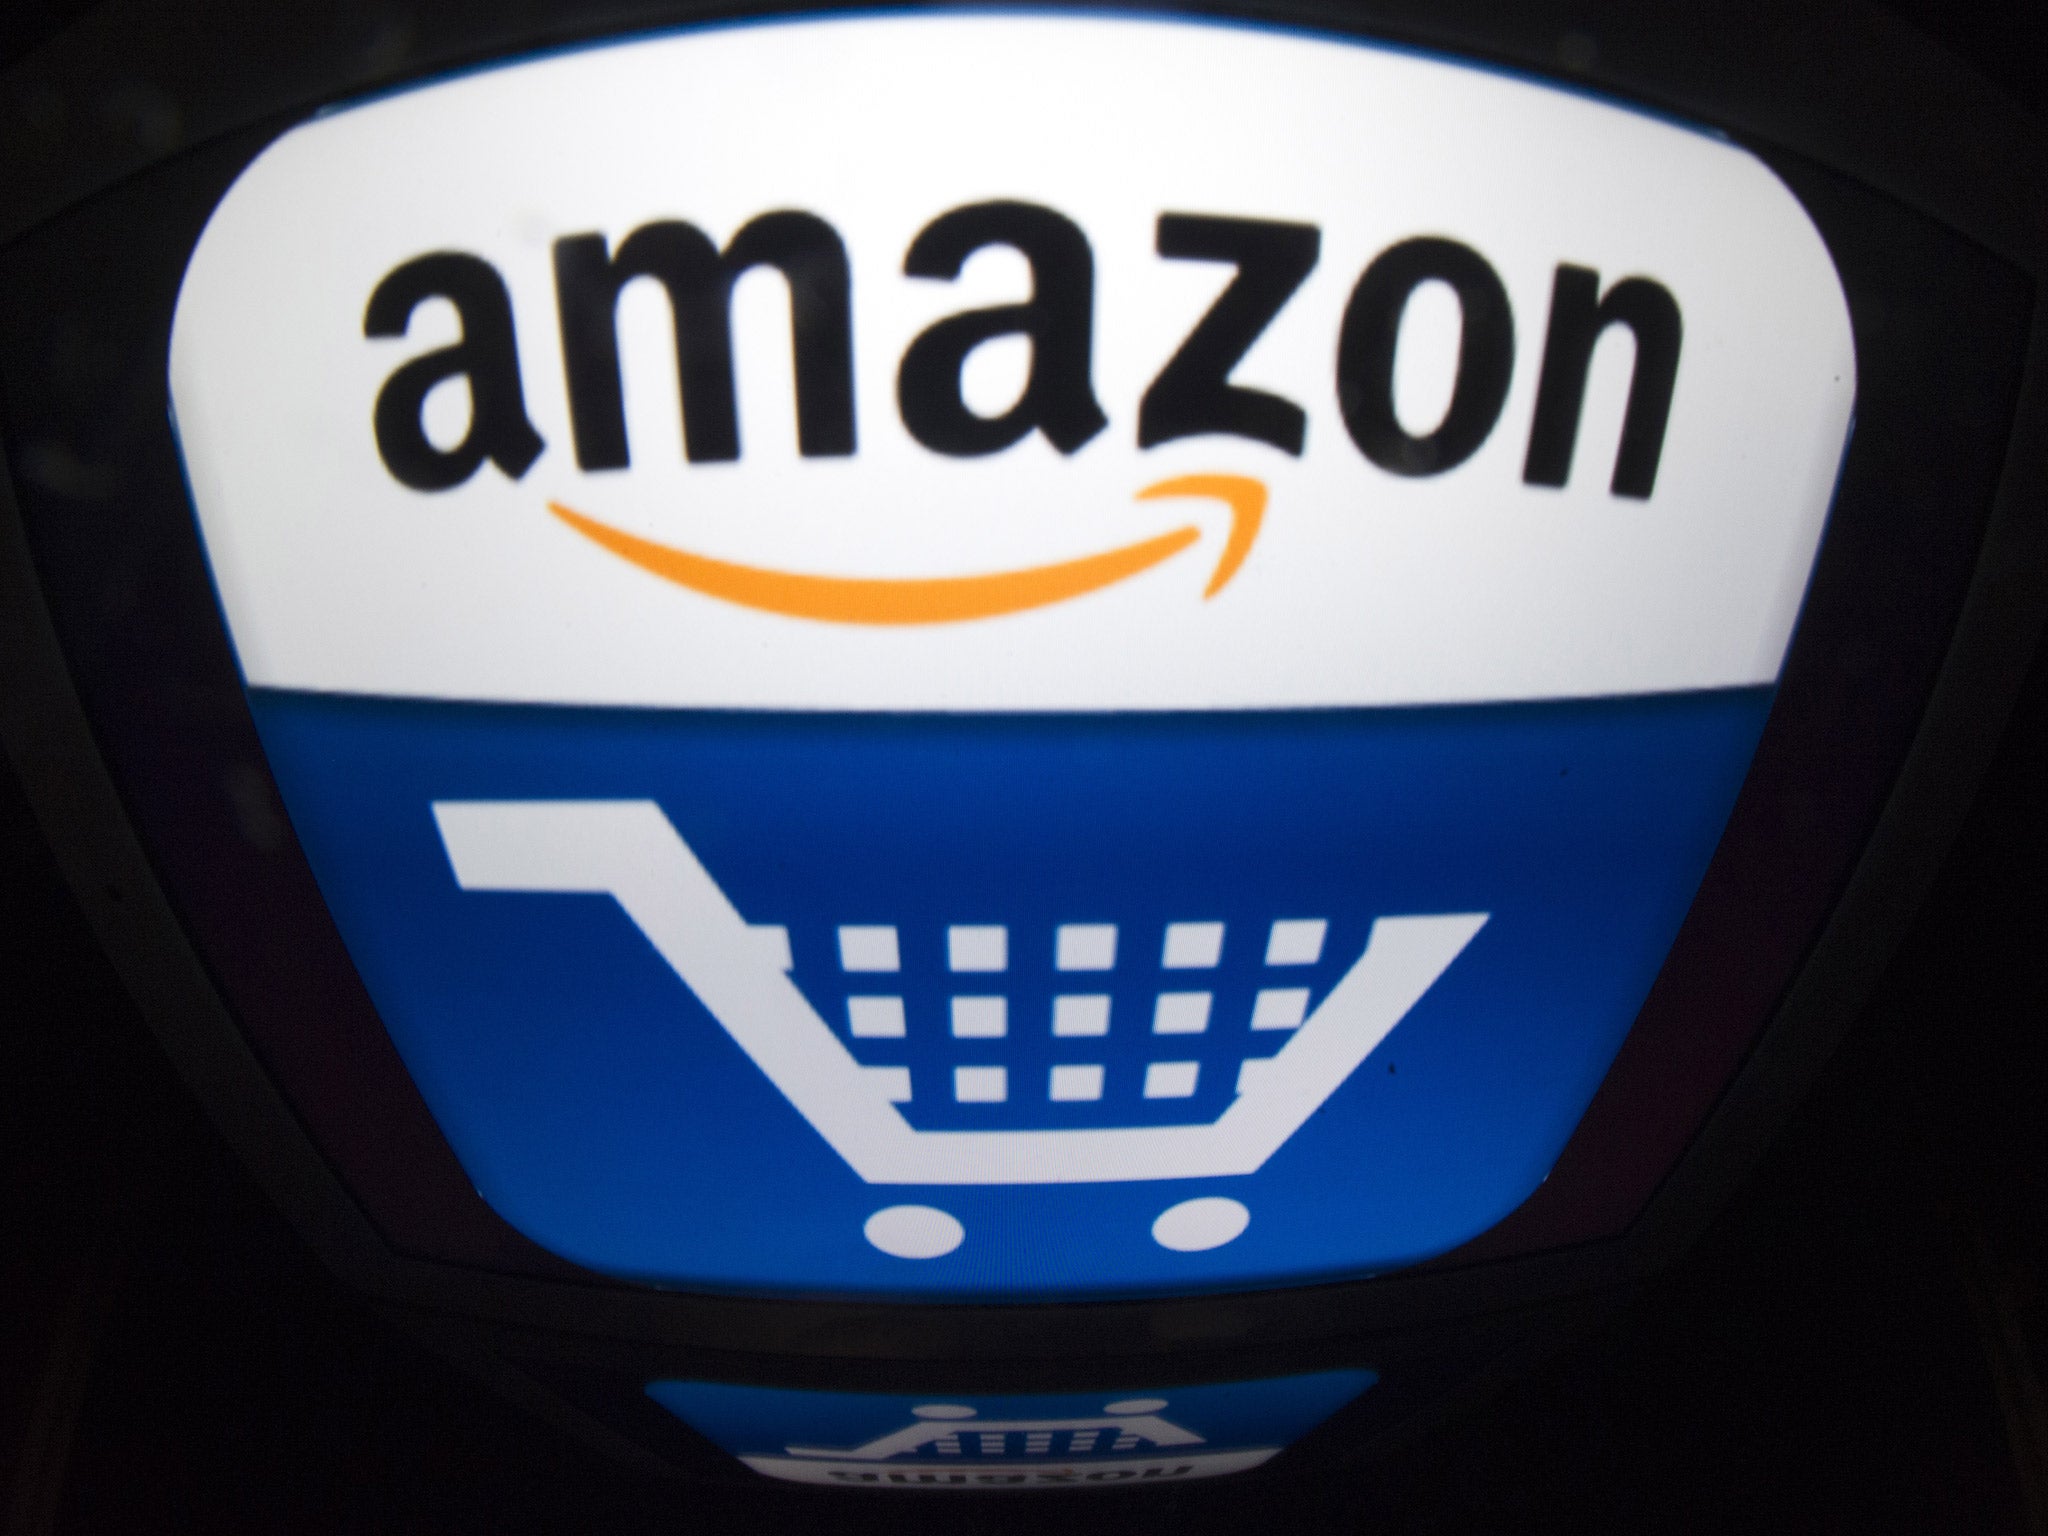 Amazon paid just £9.7m in corporation tax in the UK last year